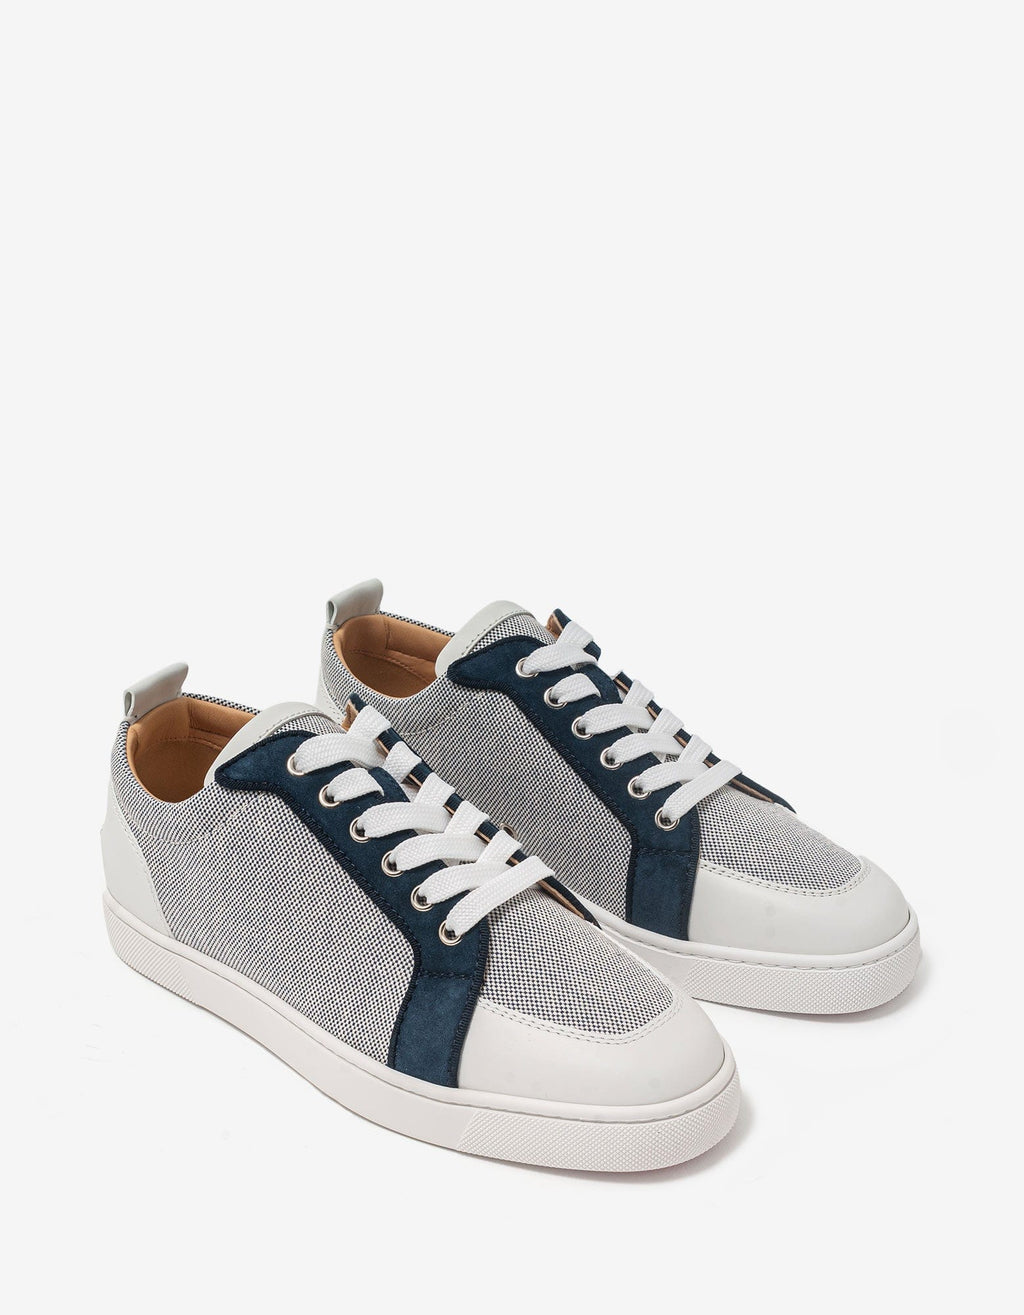 Christian Louboutin Christian Louboutin Rantulow Flat Navy Blue and & White Trainers